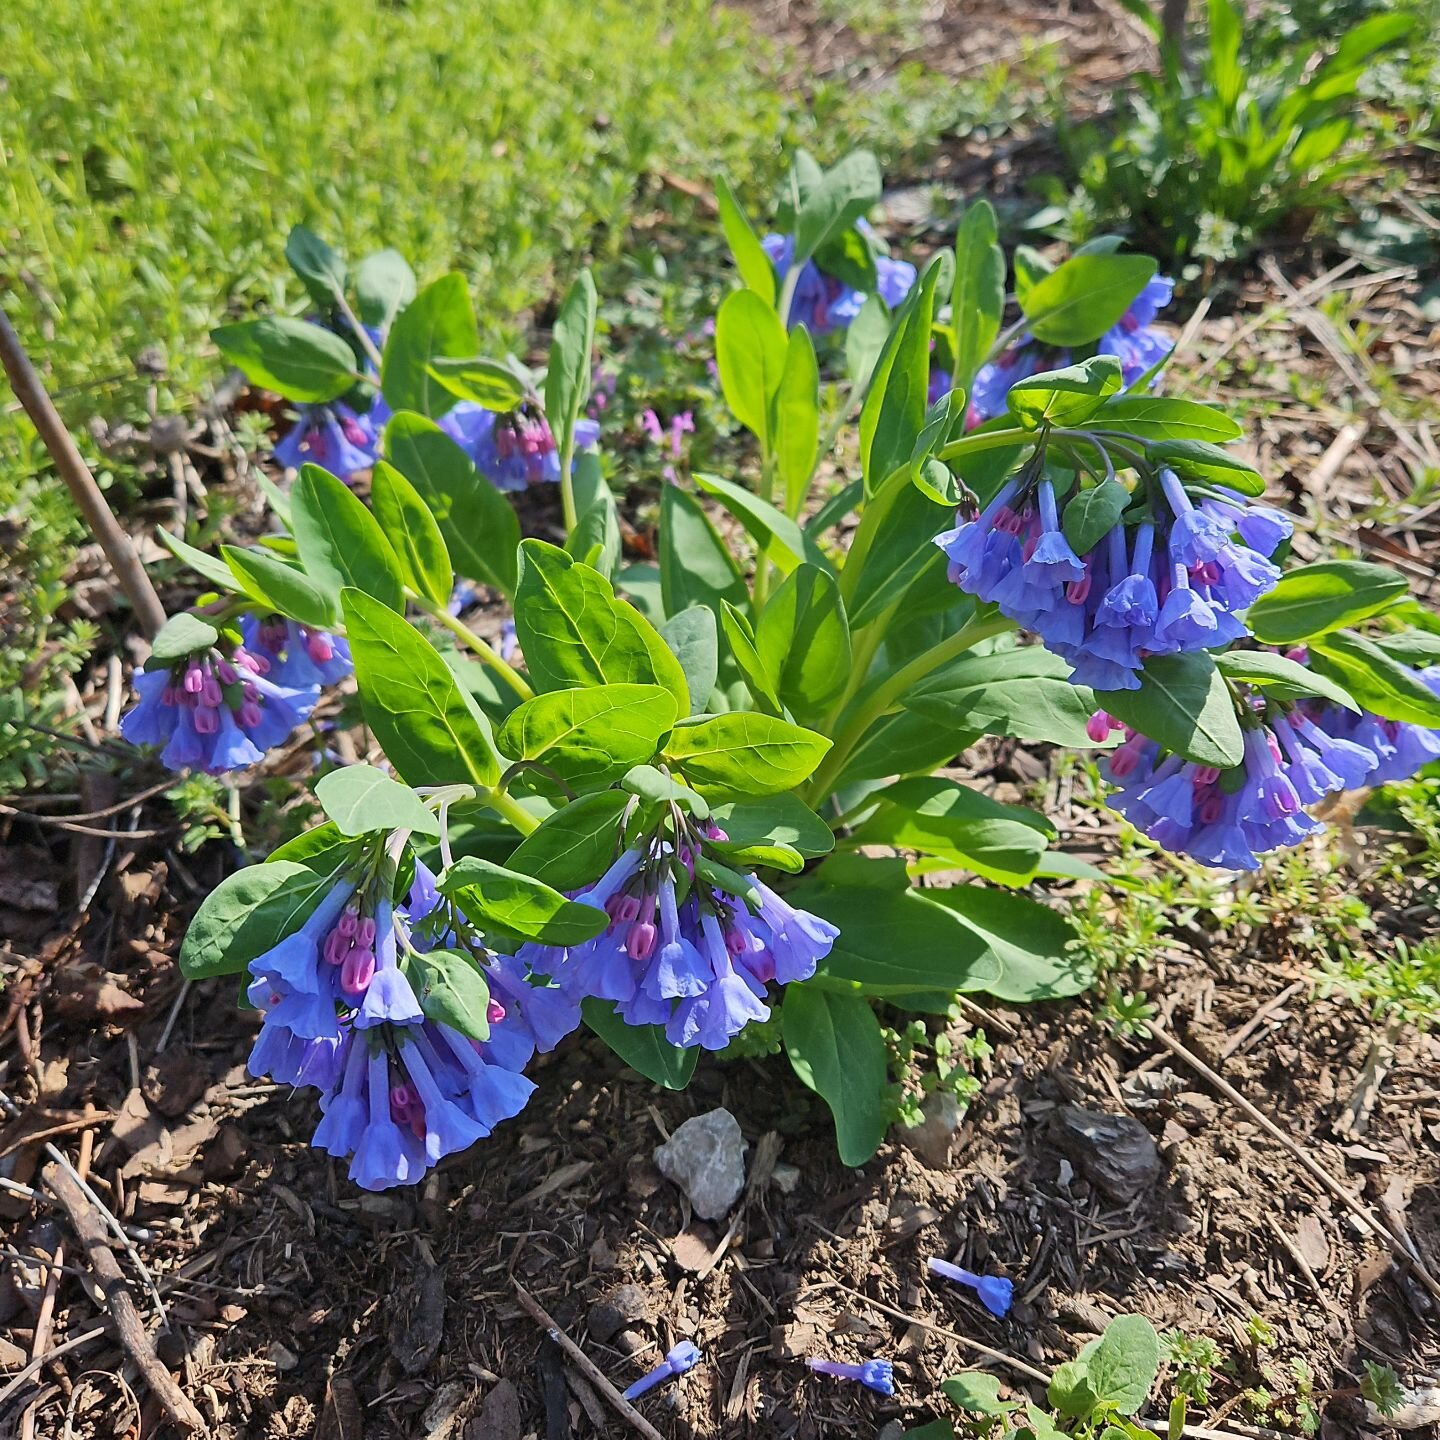 We are closed tomorrow! Have a wonderful weekend and see you next week! Photo: virginia bluebells #kclocal #missourinativeplants #kansasnativeplants #kcgardening